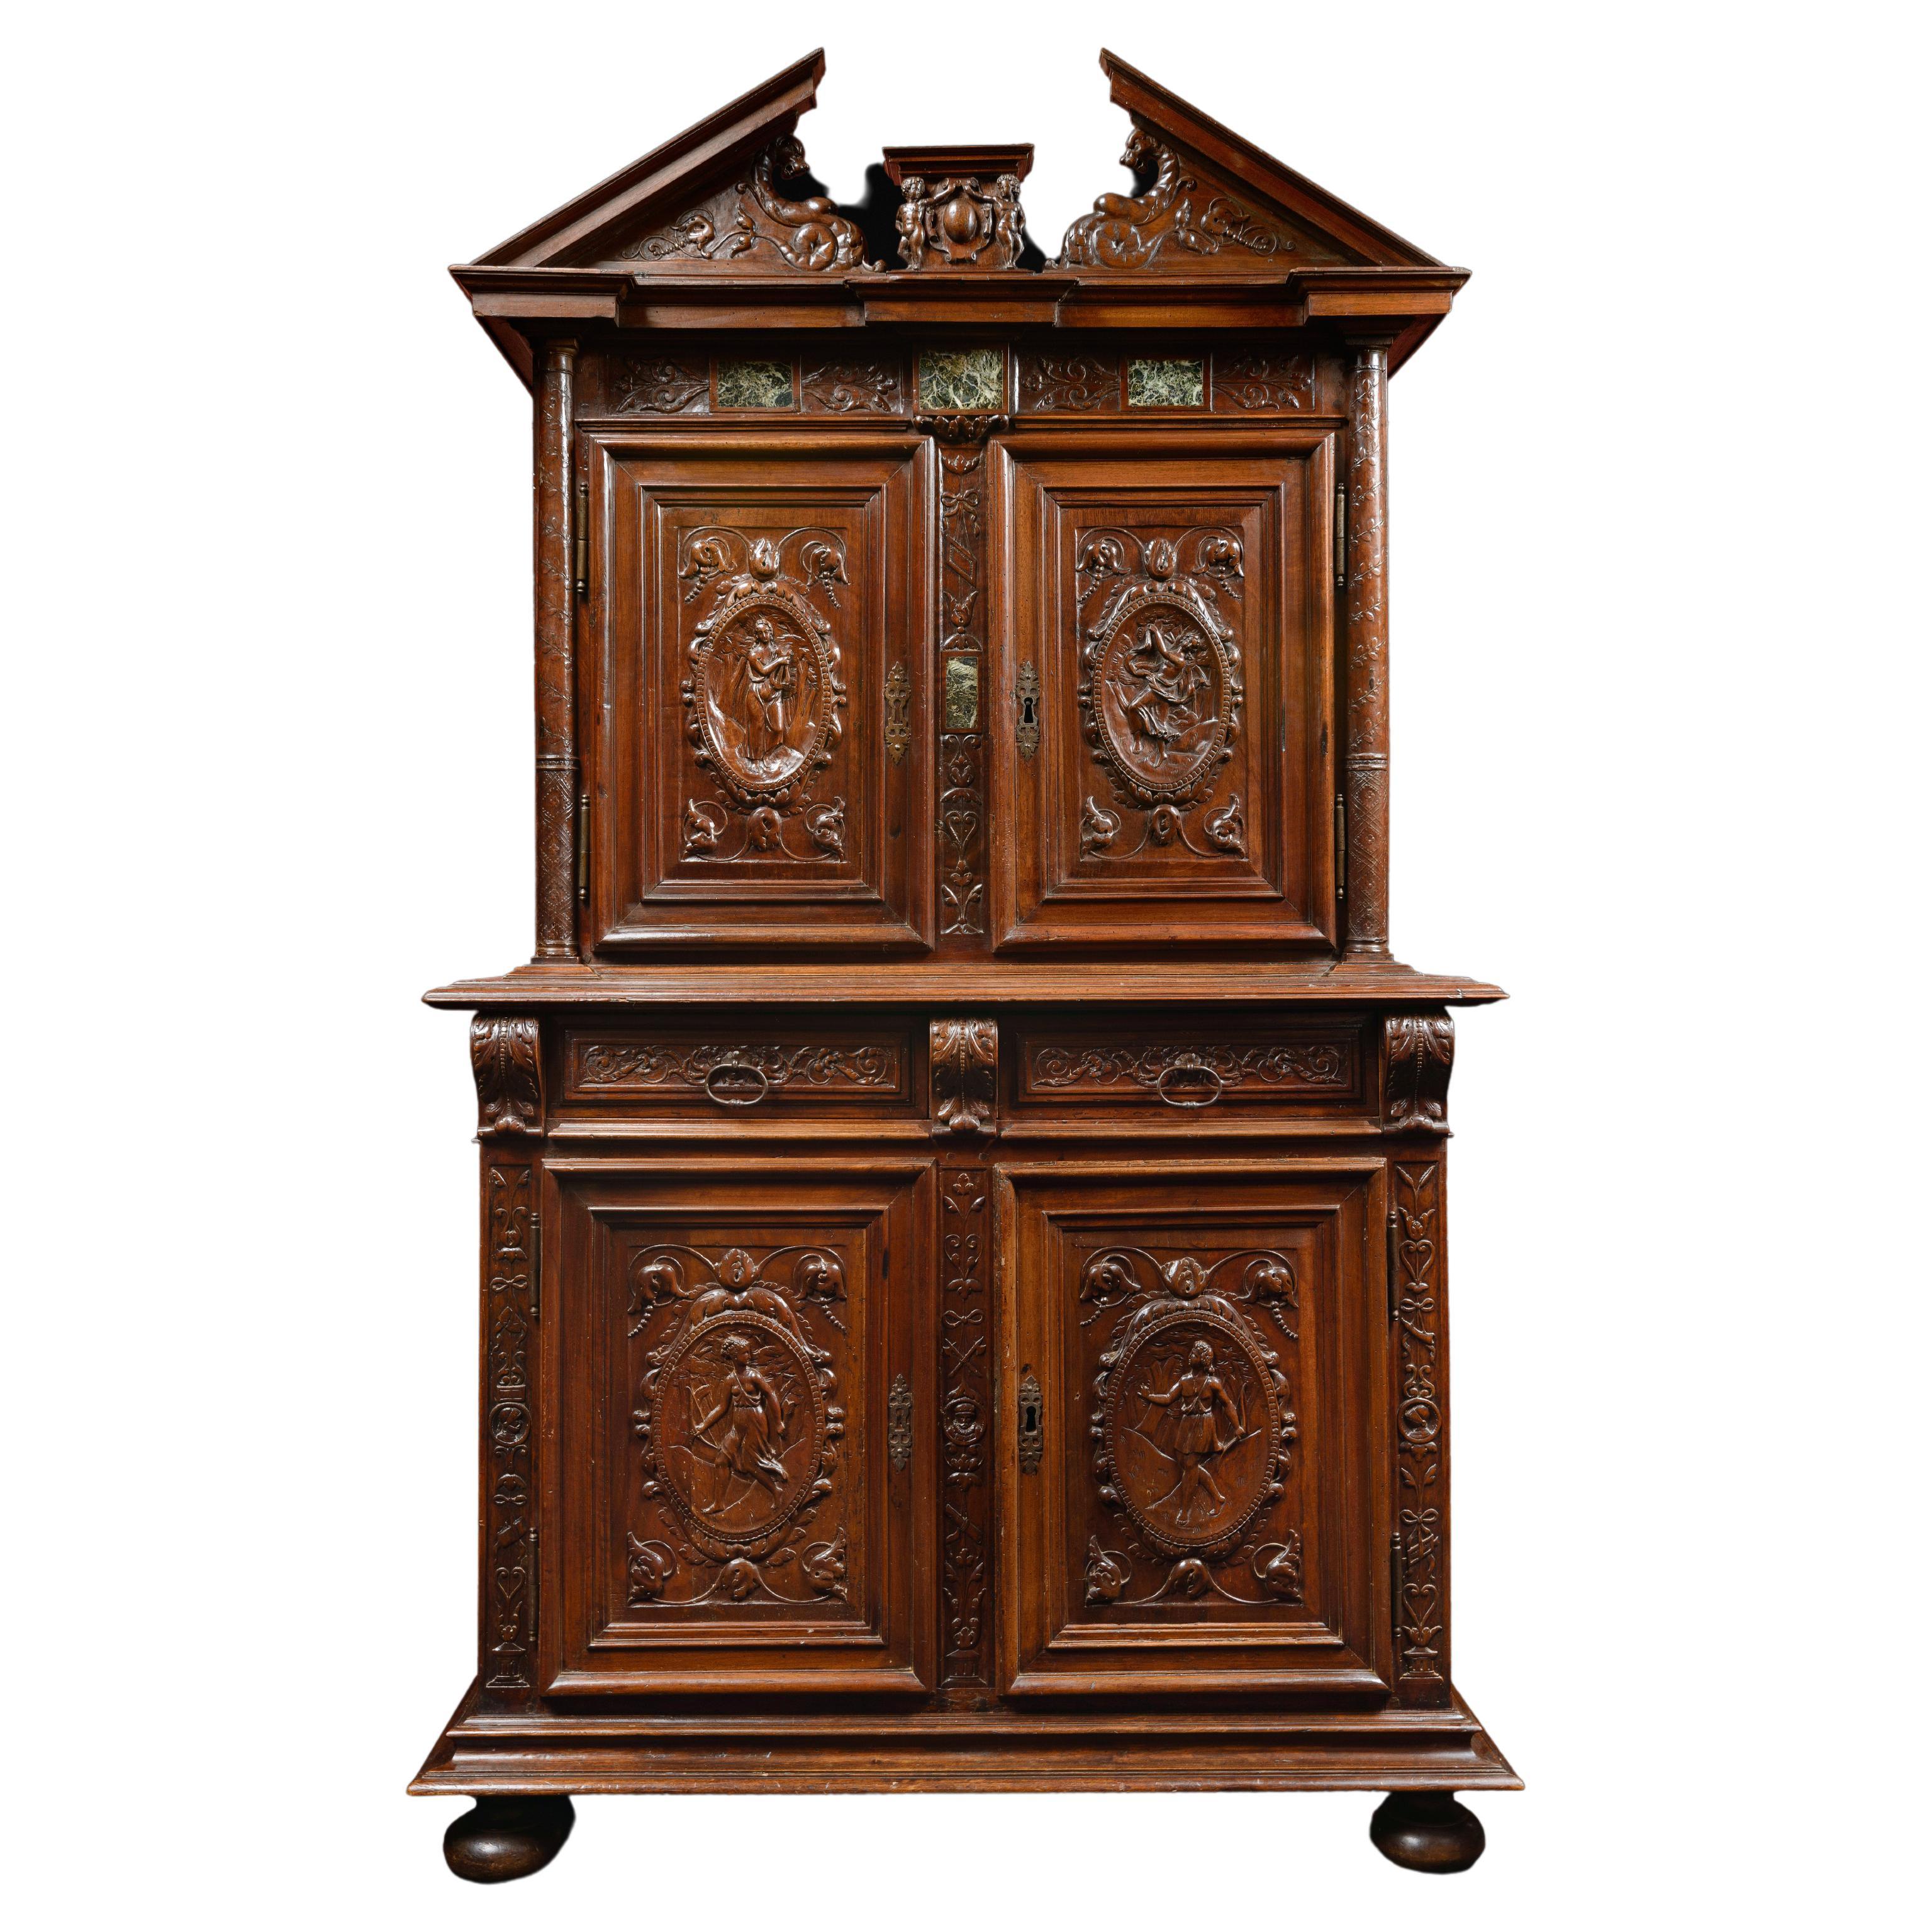 16th Century French Walnut Cabinet with Marble Inlays